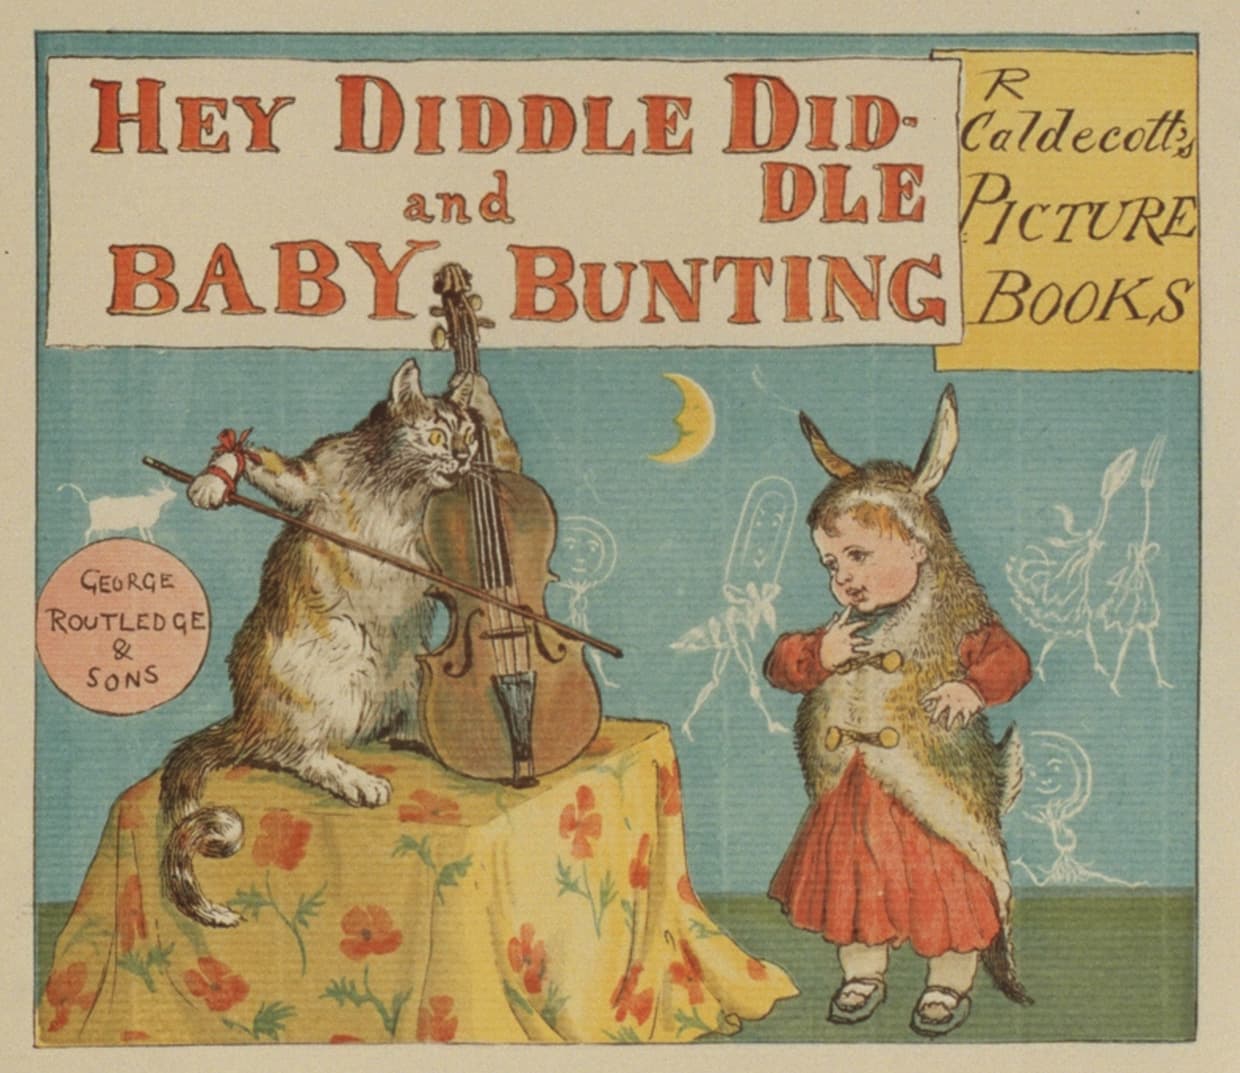 Front cover of Hey Diddle Diddle and Baby Bunting (page 317 of The Complete Collection of PICTURES and SONGS)